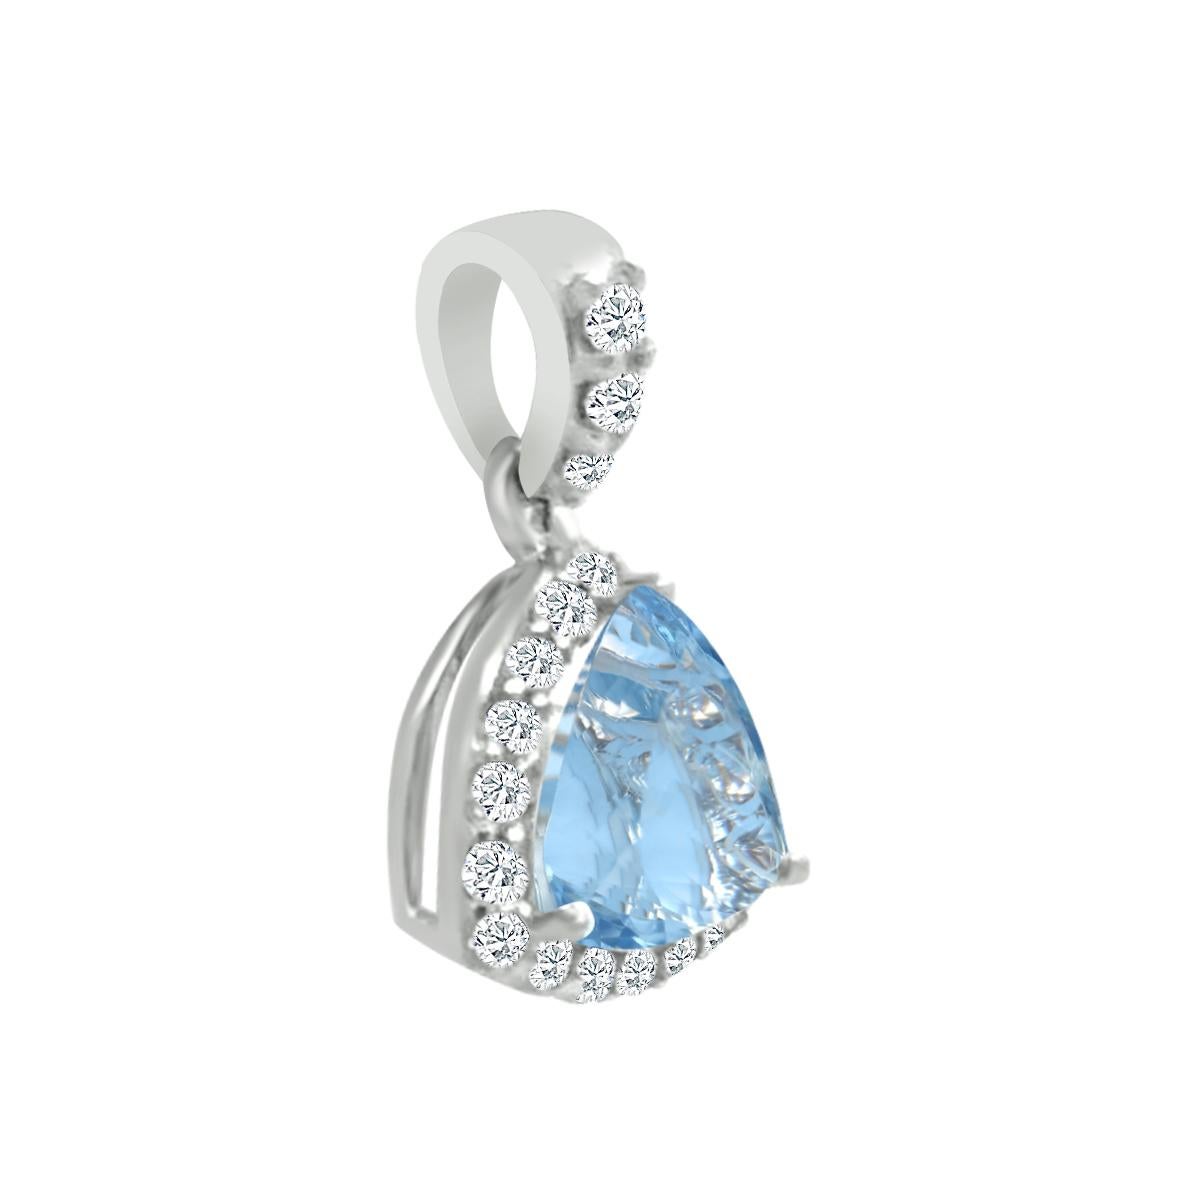 Gift This Unique Gemstone Pendant To Express Your Undying Love For Her.
This Versatile Pendant Features A Trillion Shape 7mm Aquamarine Gemstone With Diamonds Around It And Crafted In 14K White Gold.
This Gorgeous Aquamarine Pendant Will Be The